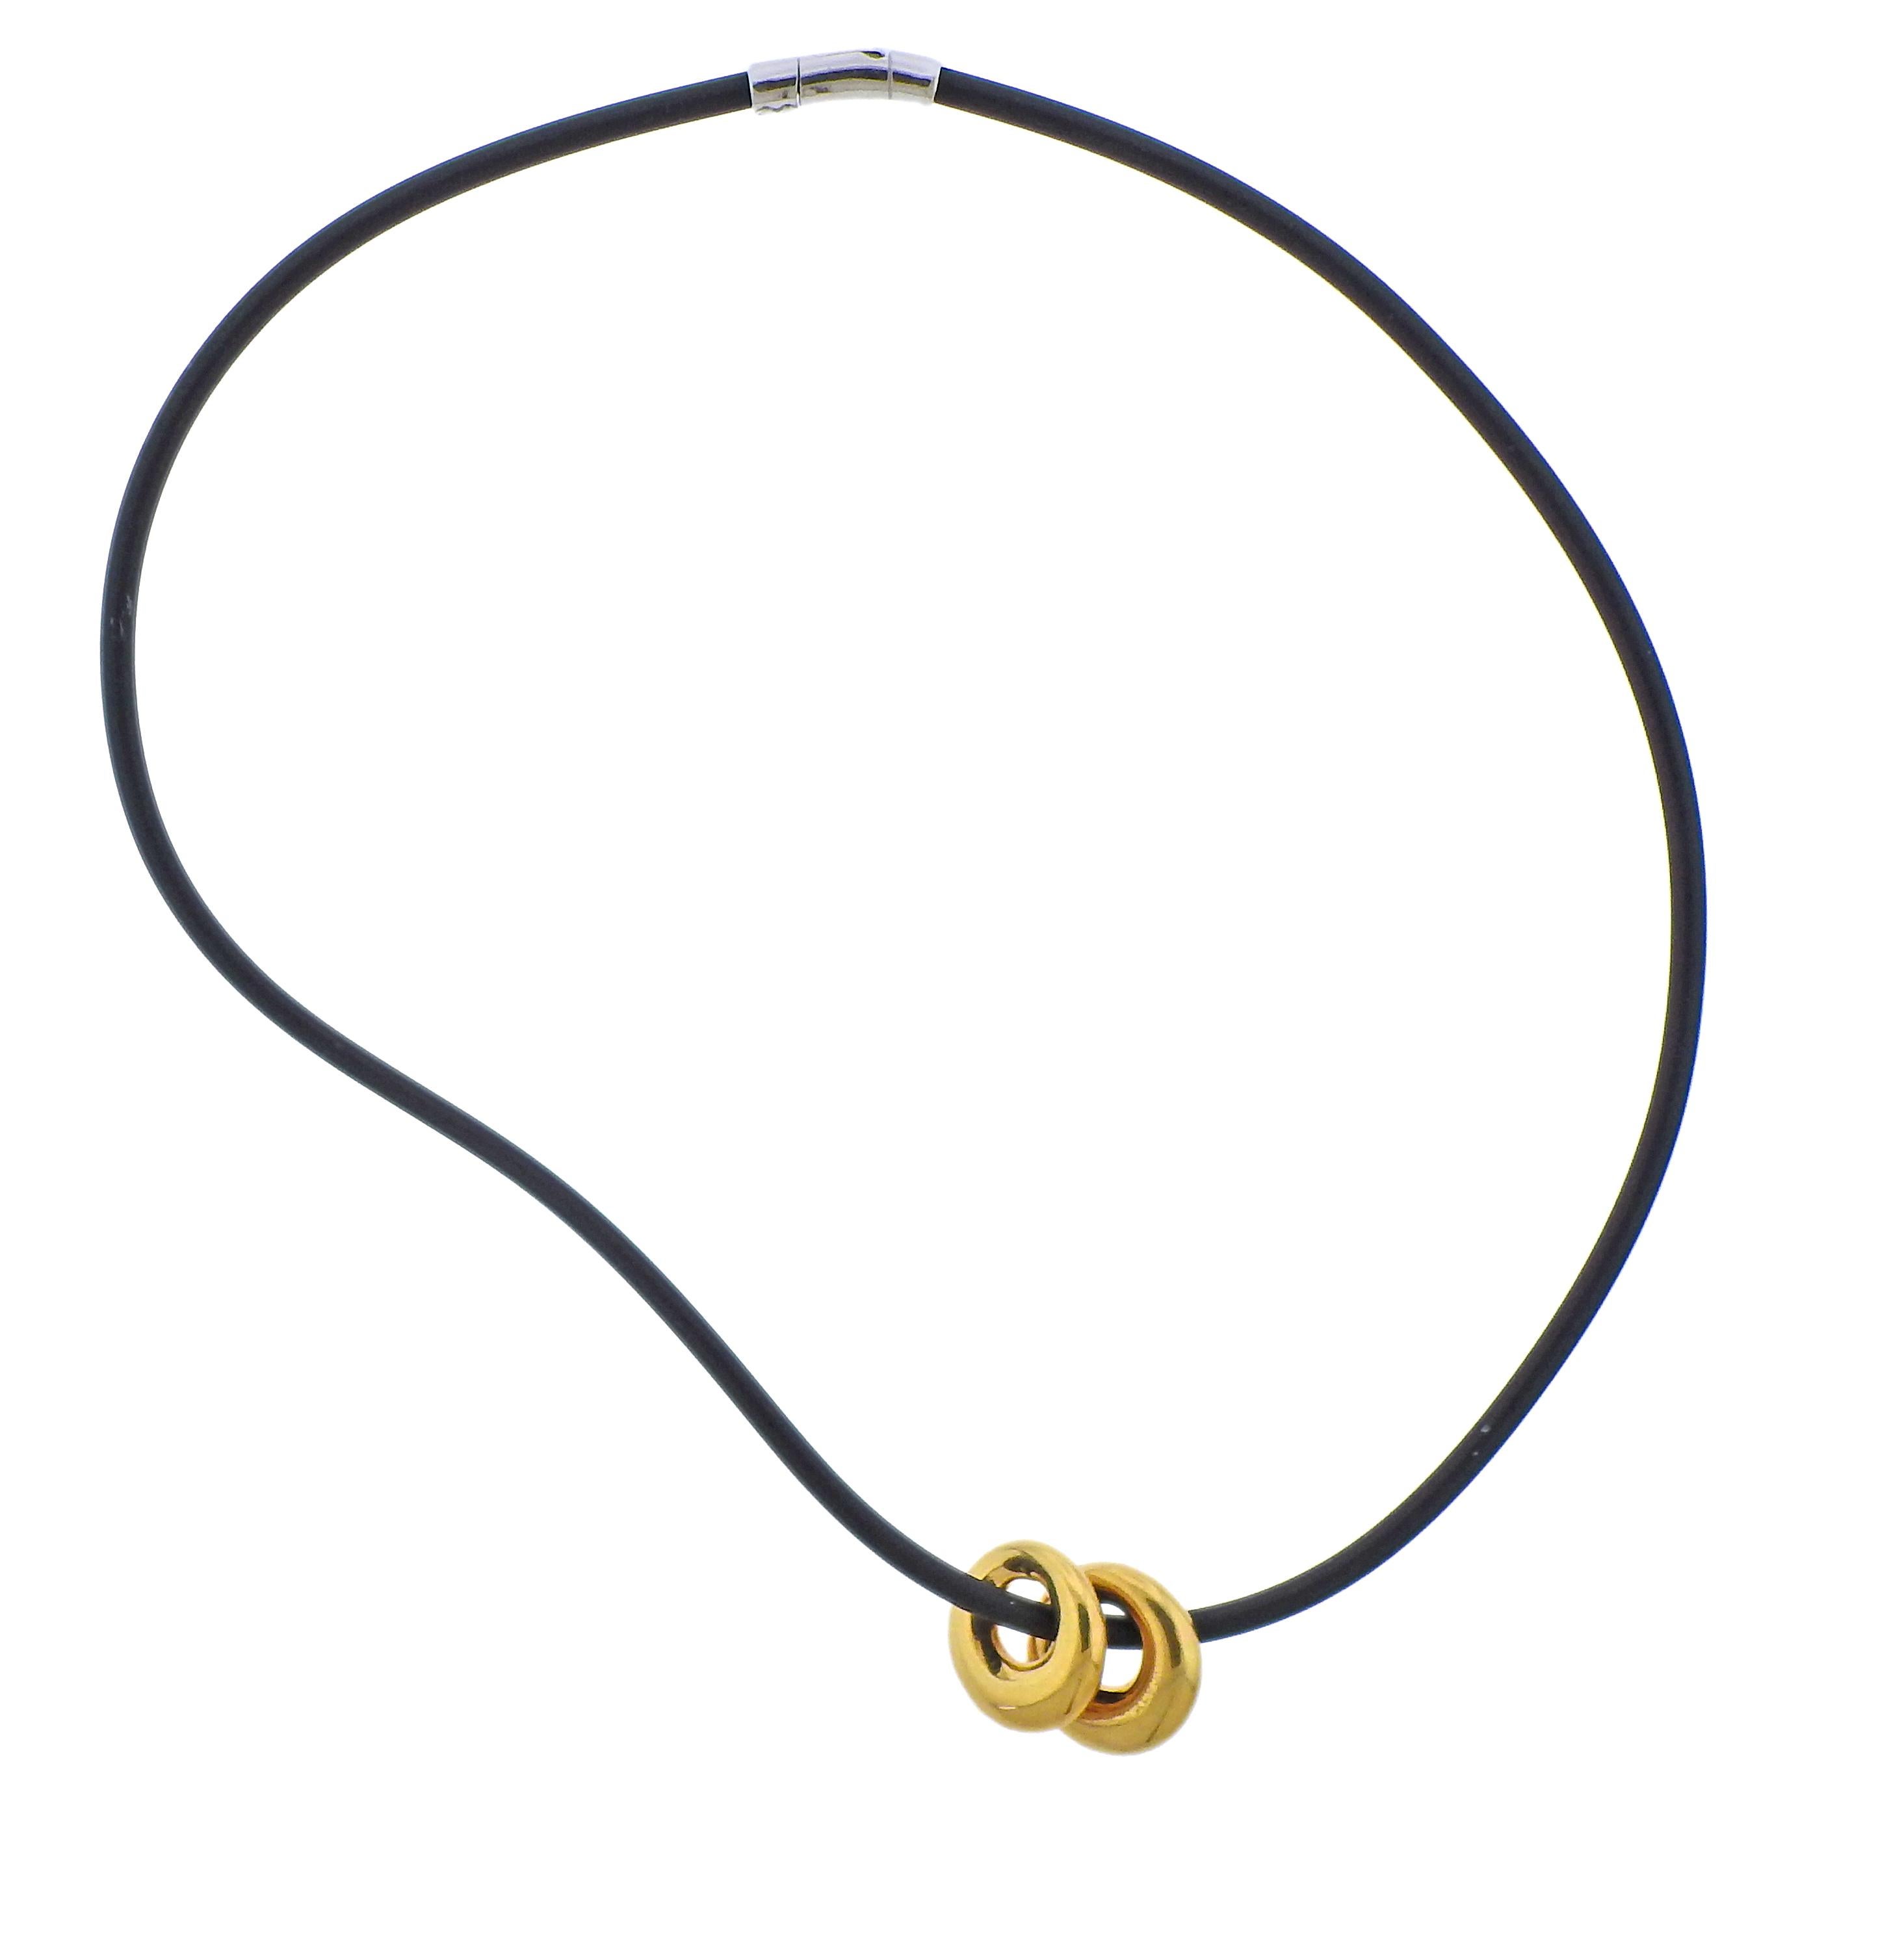 Two 18k yellow gold circle pendants by Van Cleef & Arpels, suspended on a black 18k gold Italian-made rubber cord necklace. Necklace is 18